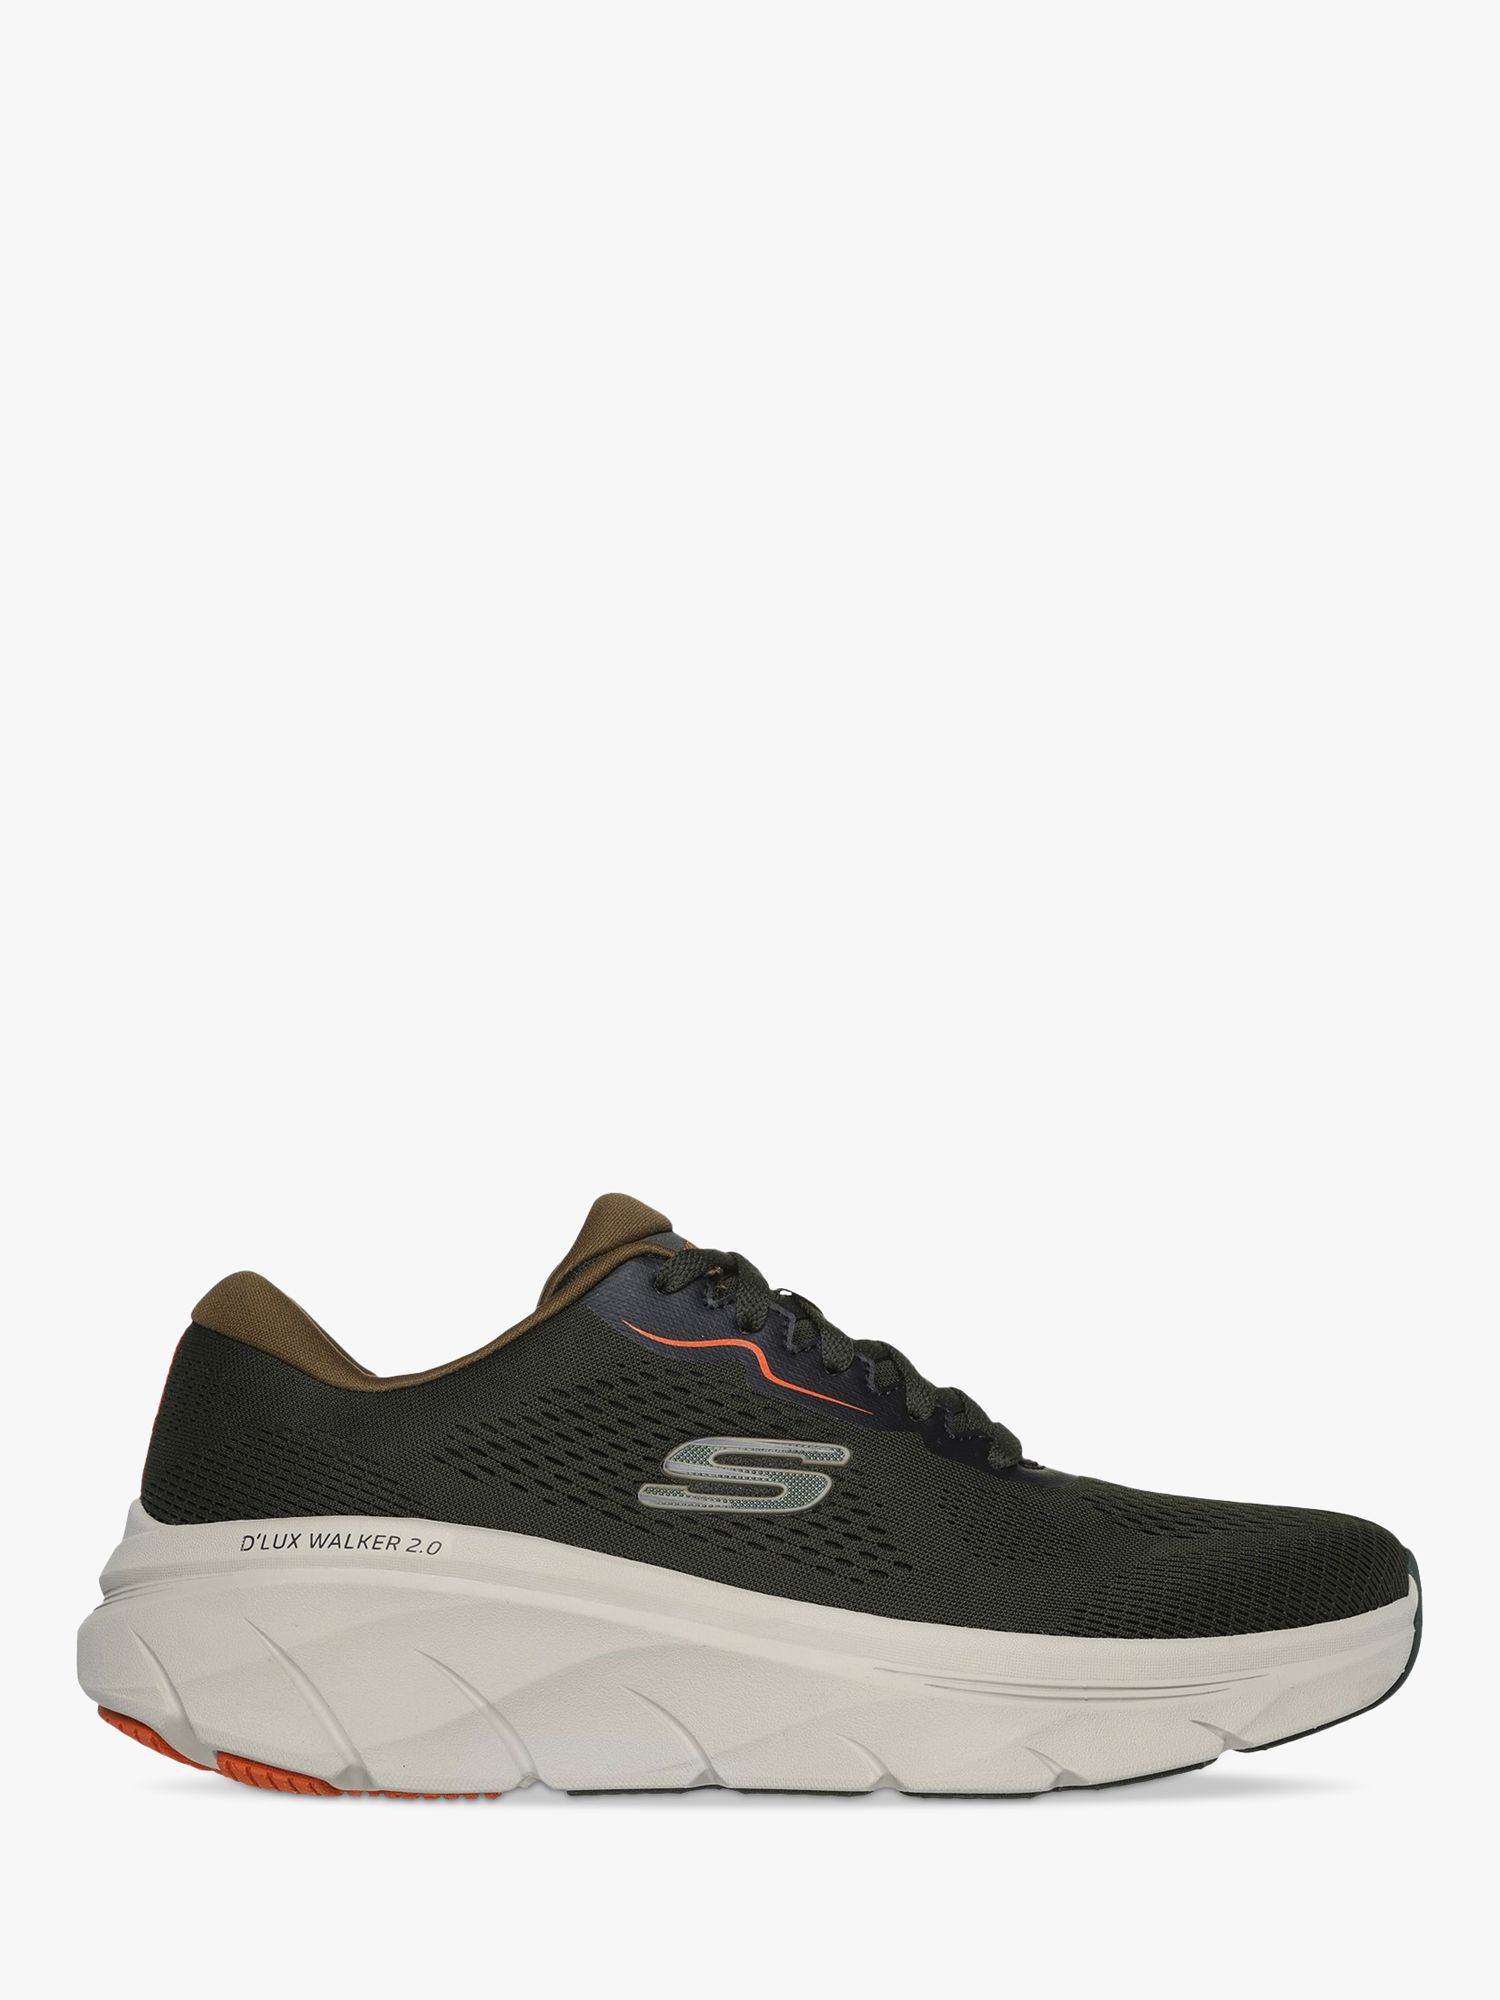 Skechers D'Lux Walker 2.0 Trainers, Olive at John Lewis & Partners